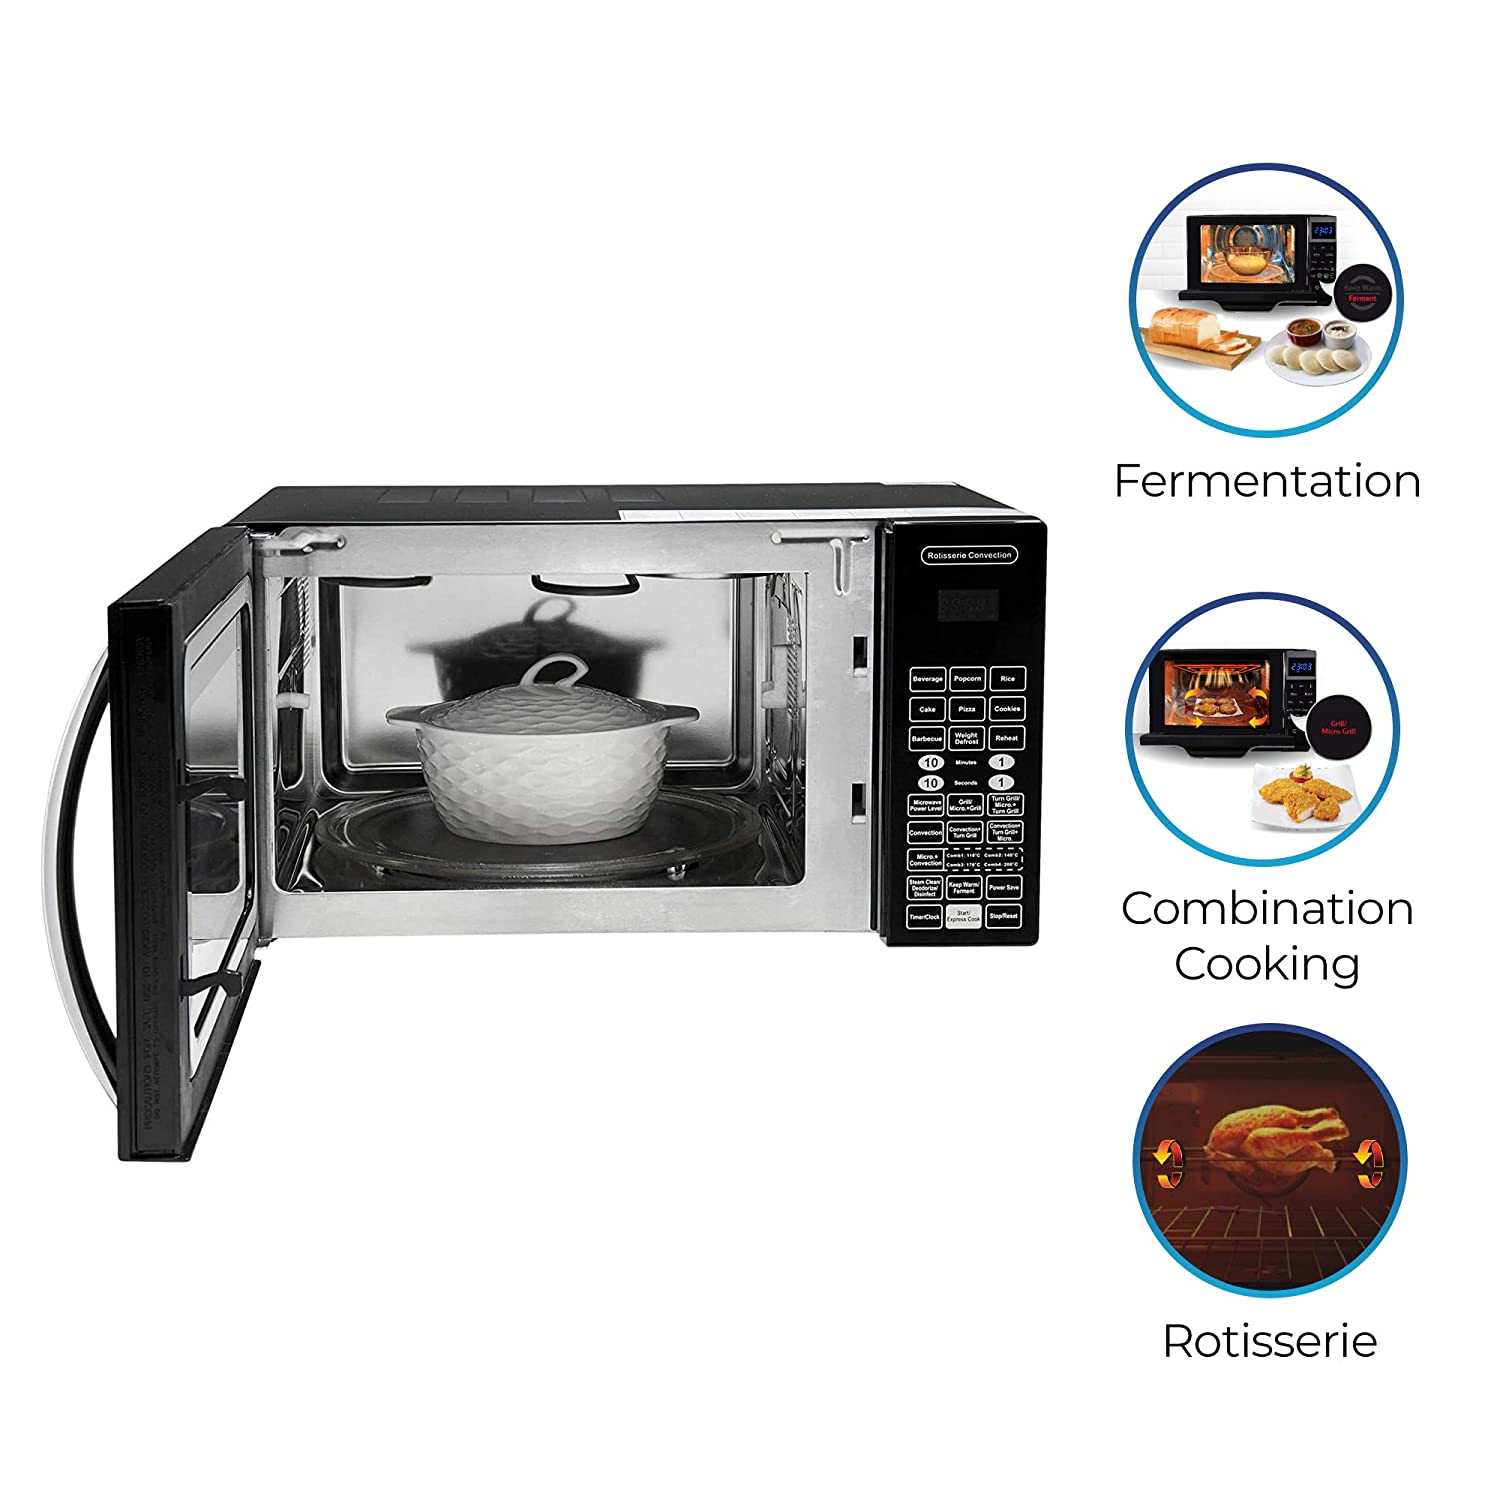 IFB 30 L Convection Microwave Oven (30BRC2, Black, With Starter Kit)